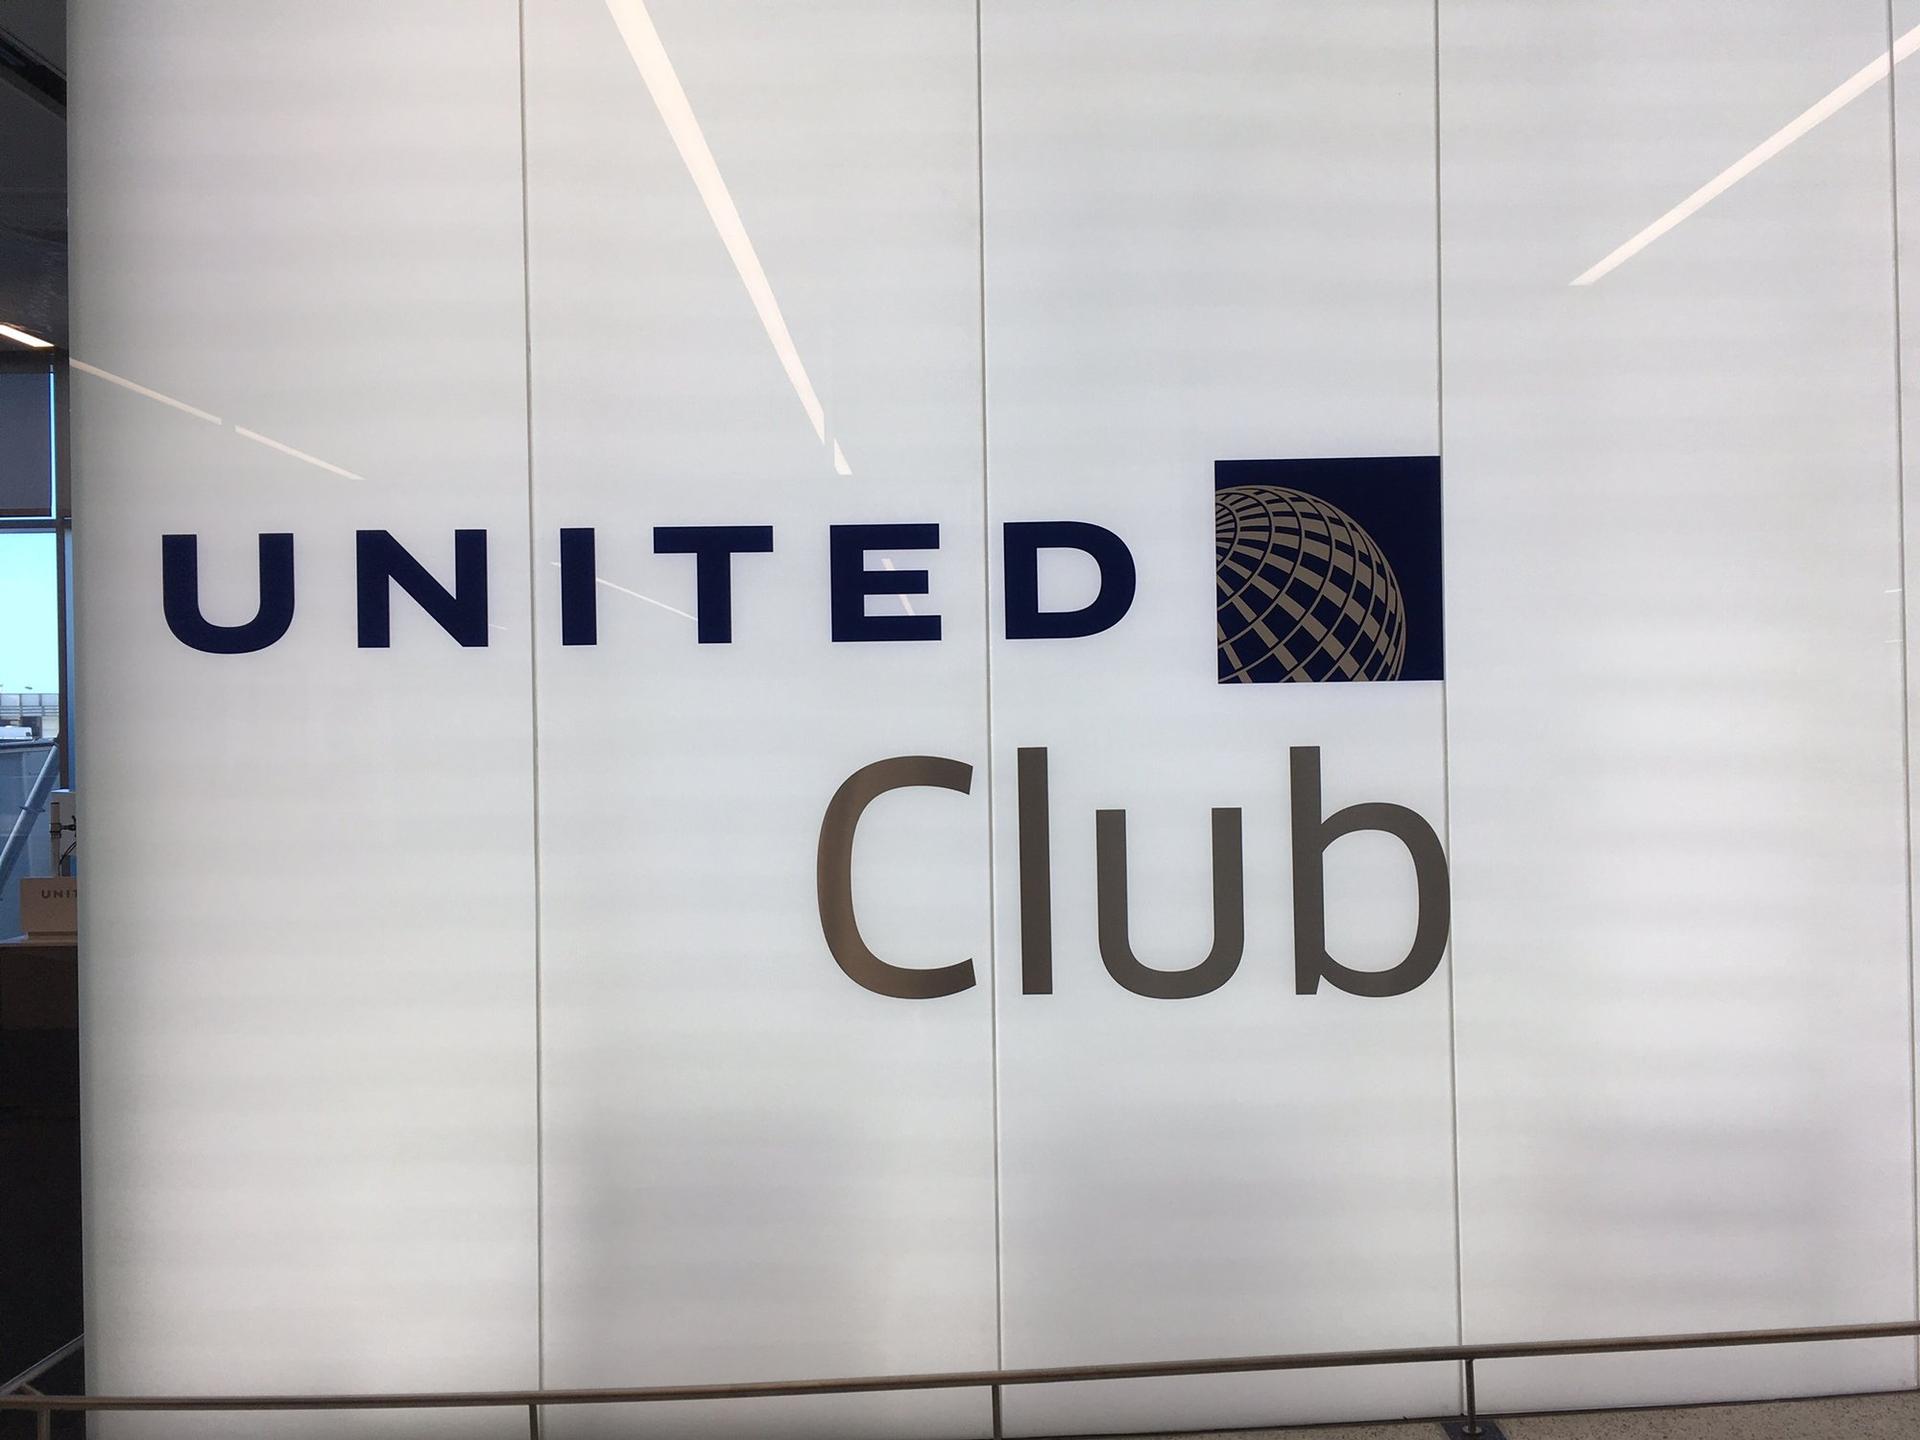 United Airlines United Club (Gate 71A) image 81 of 100